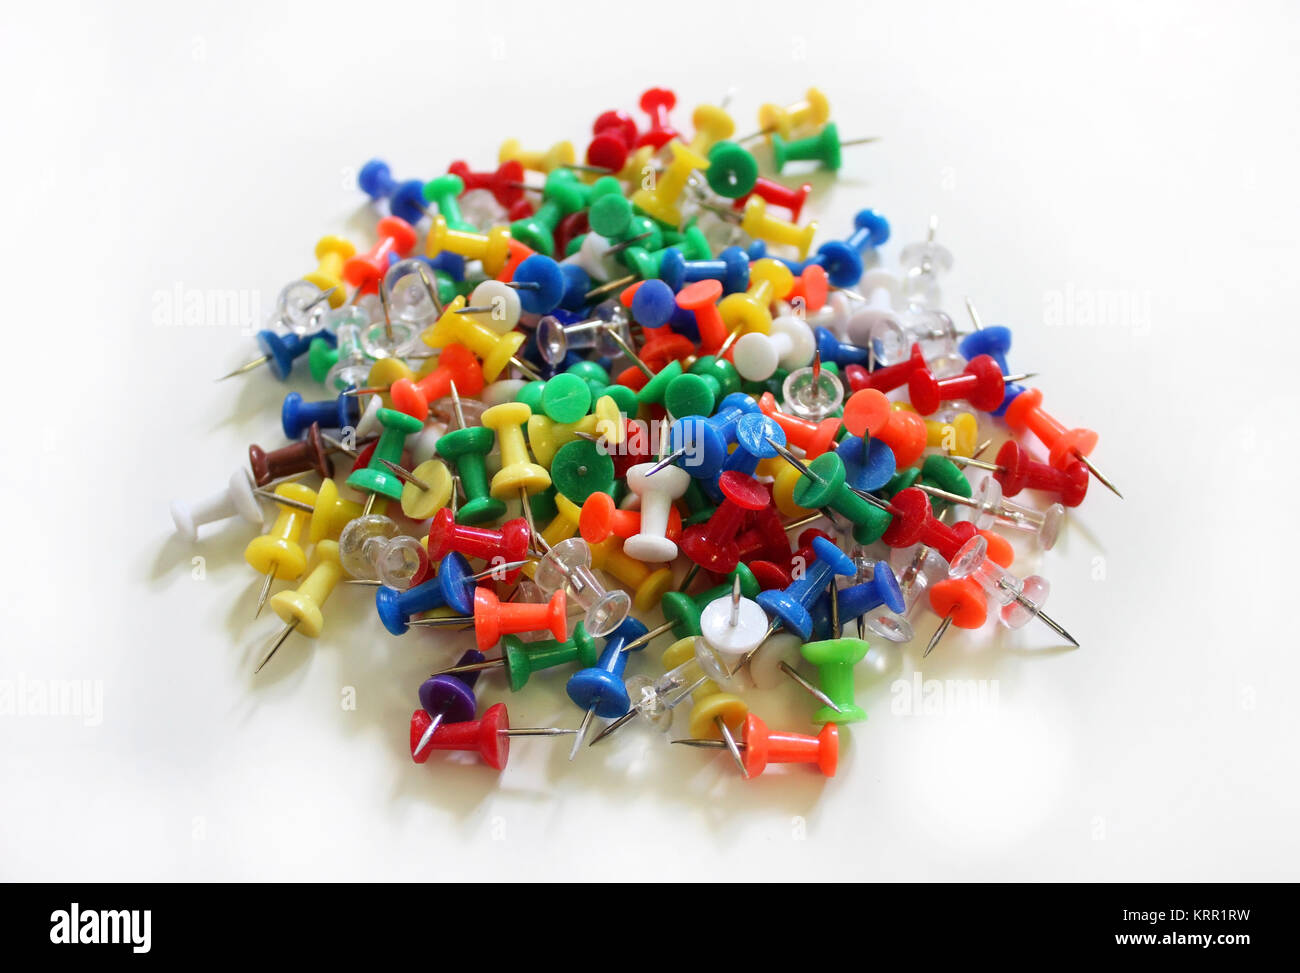 A pile of colorful thumb tacks on a white surface Stock Photo